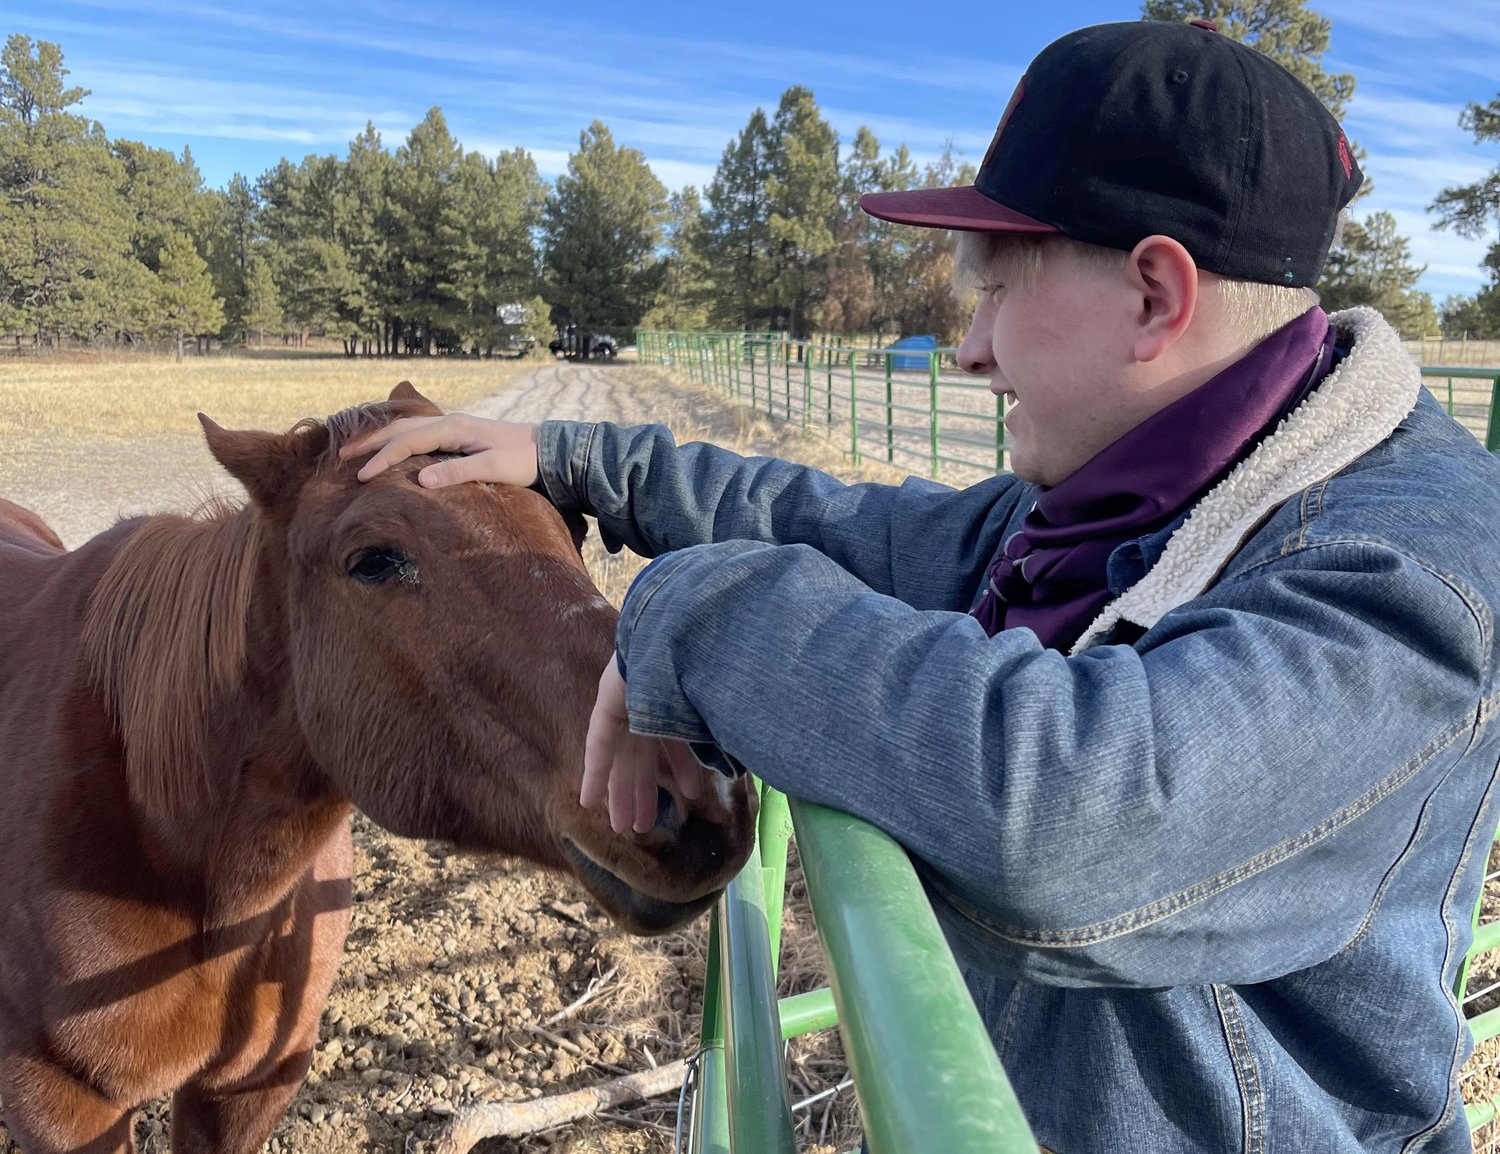 Brian Gillen stands with his family's 25-year-old horse, Thumper. Thumper was the horse Gillen rode from the days when he was a 12-year-old boy until his freshman year of college. Gillen is part of the West Texas A&amp;M University Rodeo Team and hopes to become a professional rodeo cowboy.